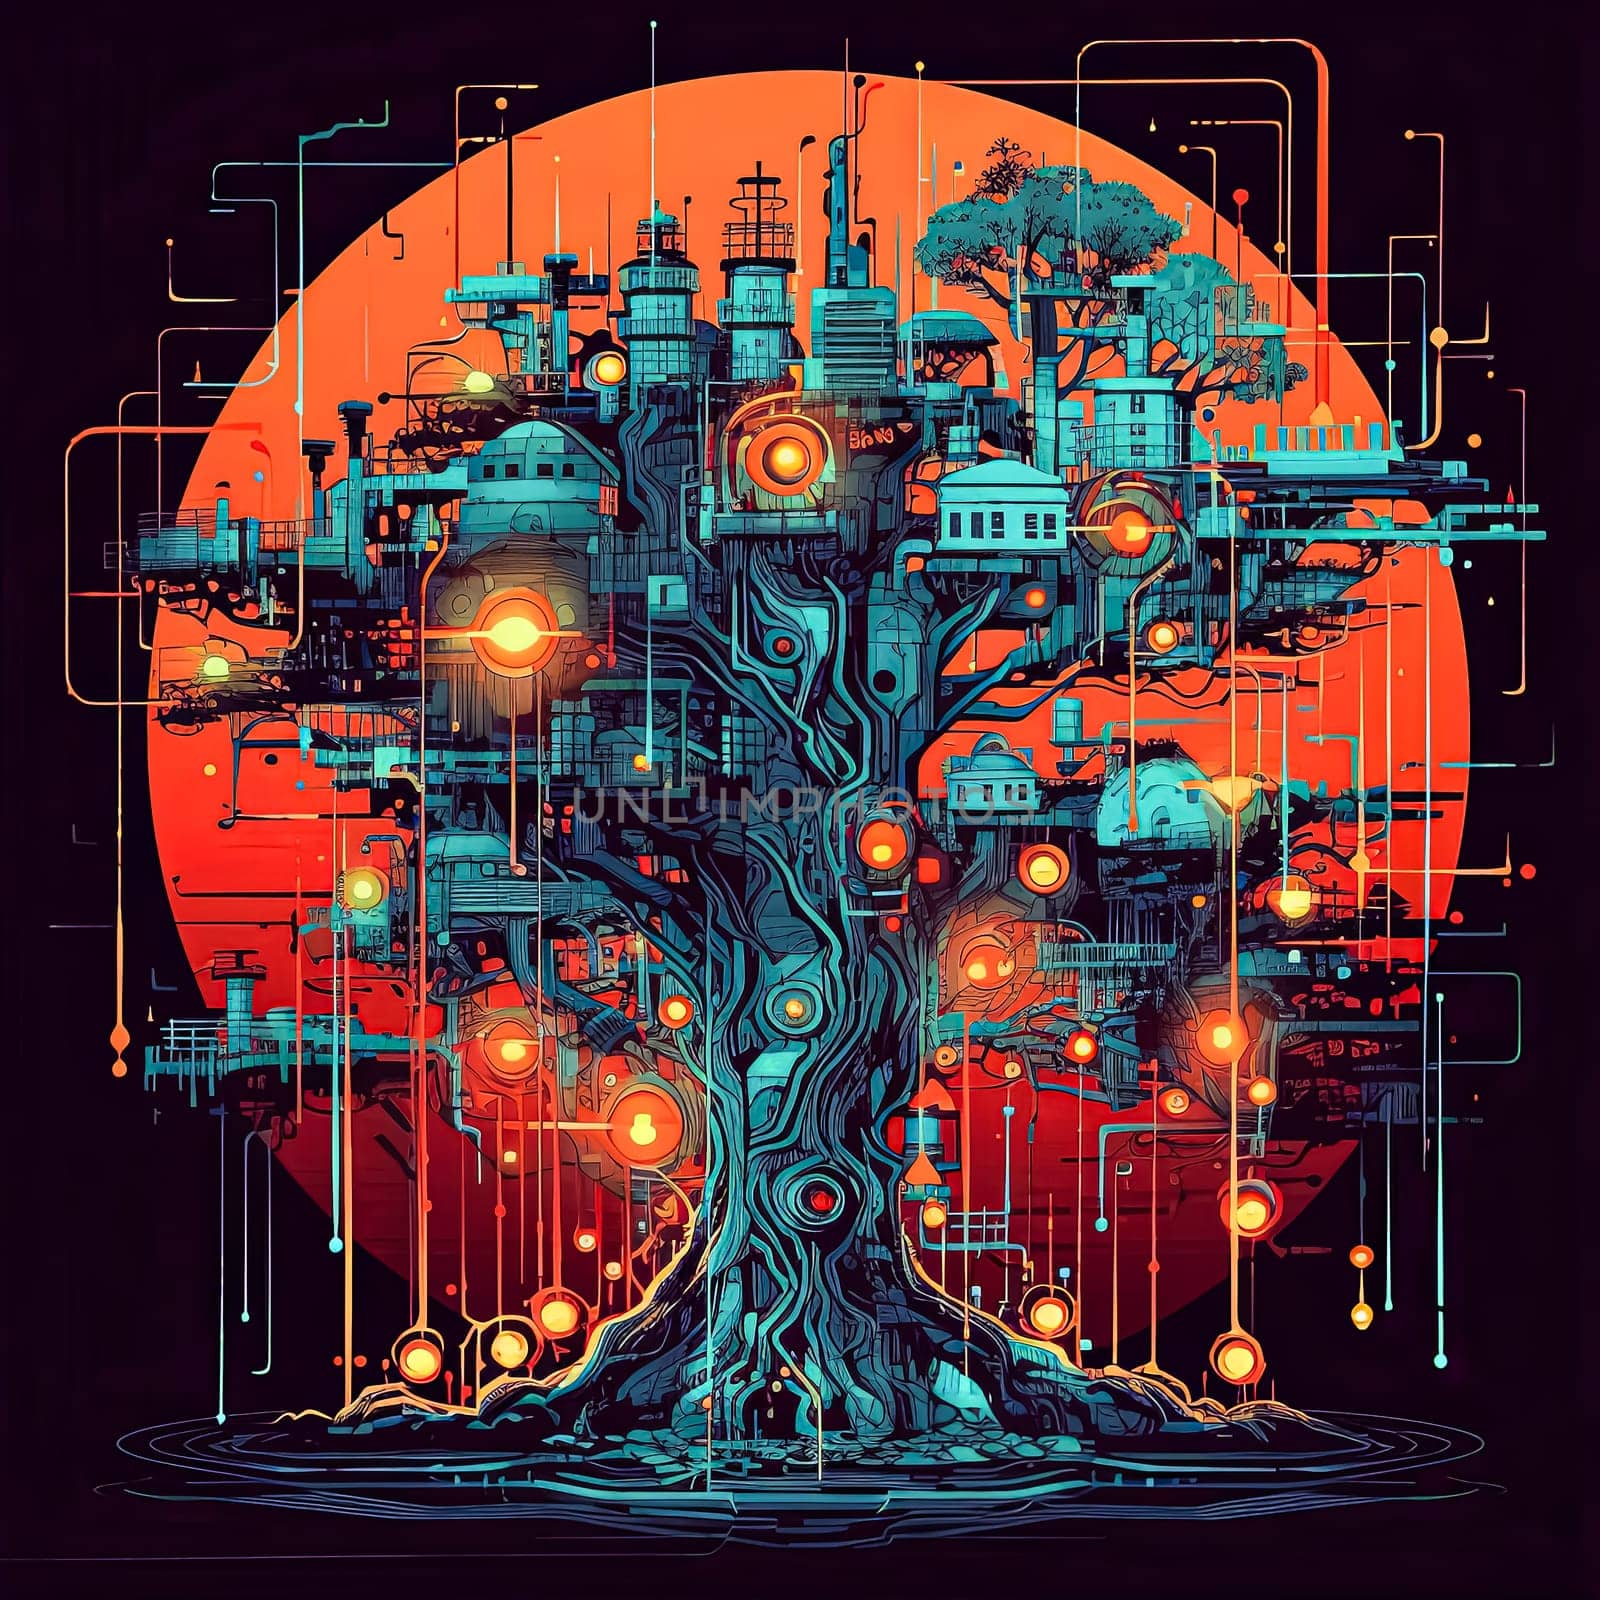 A tree with many buildings on it is surrounded by a red circle. The tree is lit up with lights, giving it a futuristic and technological feel